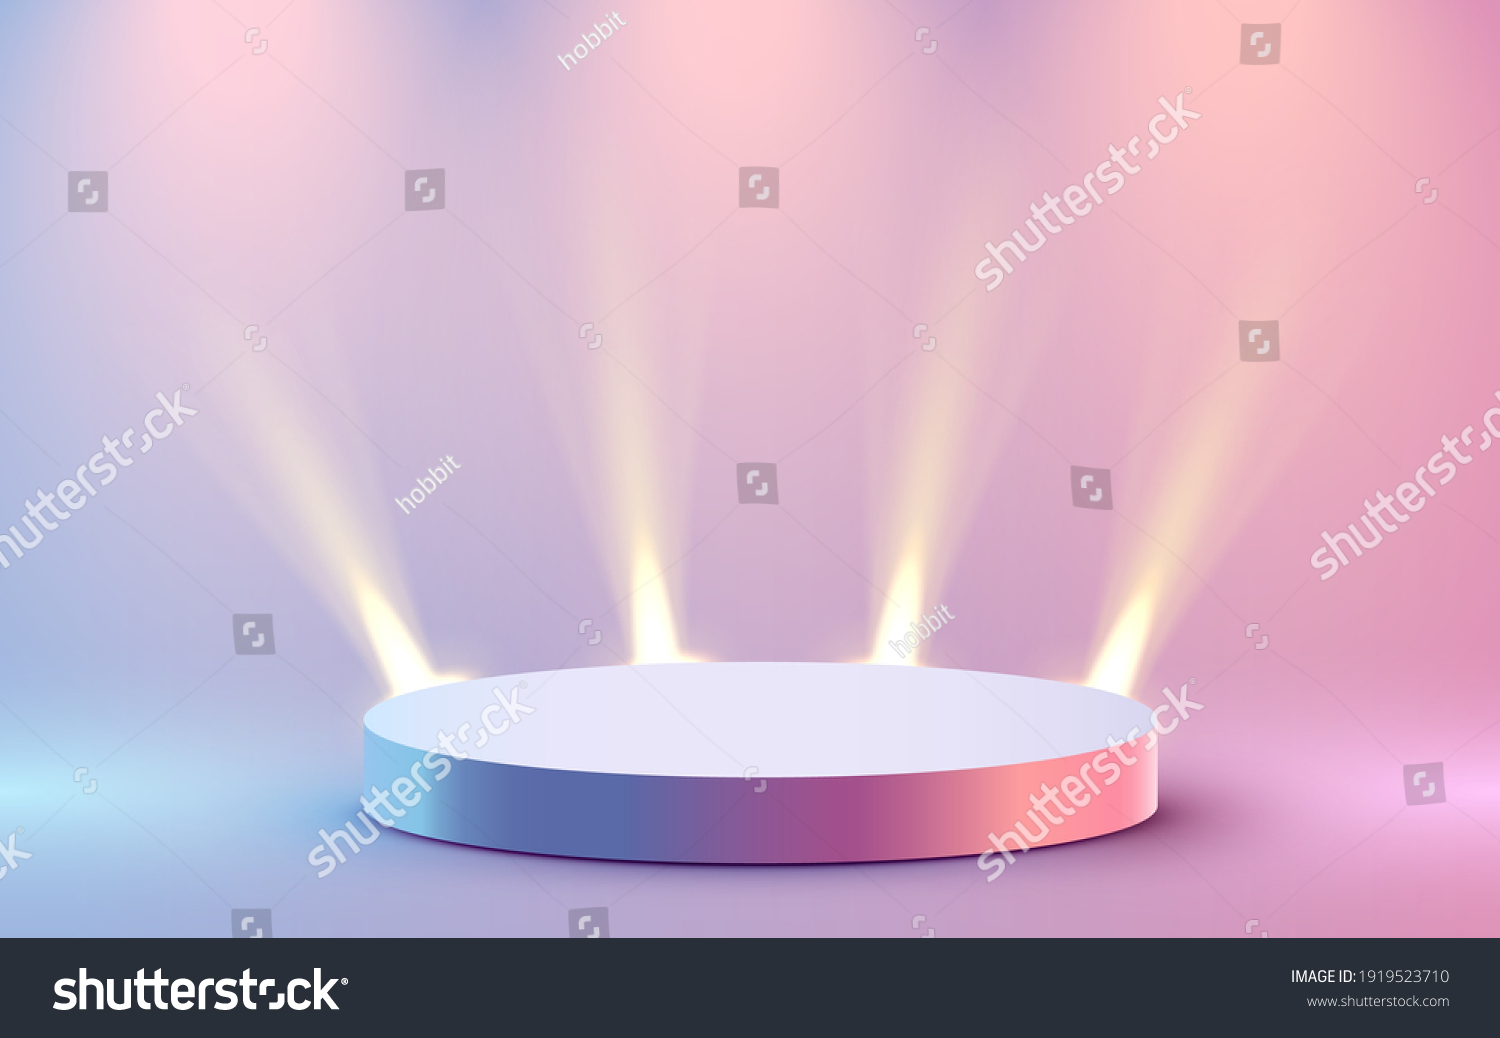 SVG of Abstract round podium illuminated with spotlight. Award ceremony concept. Stage backdrop. Vector illustration svg